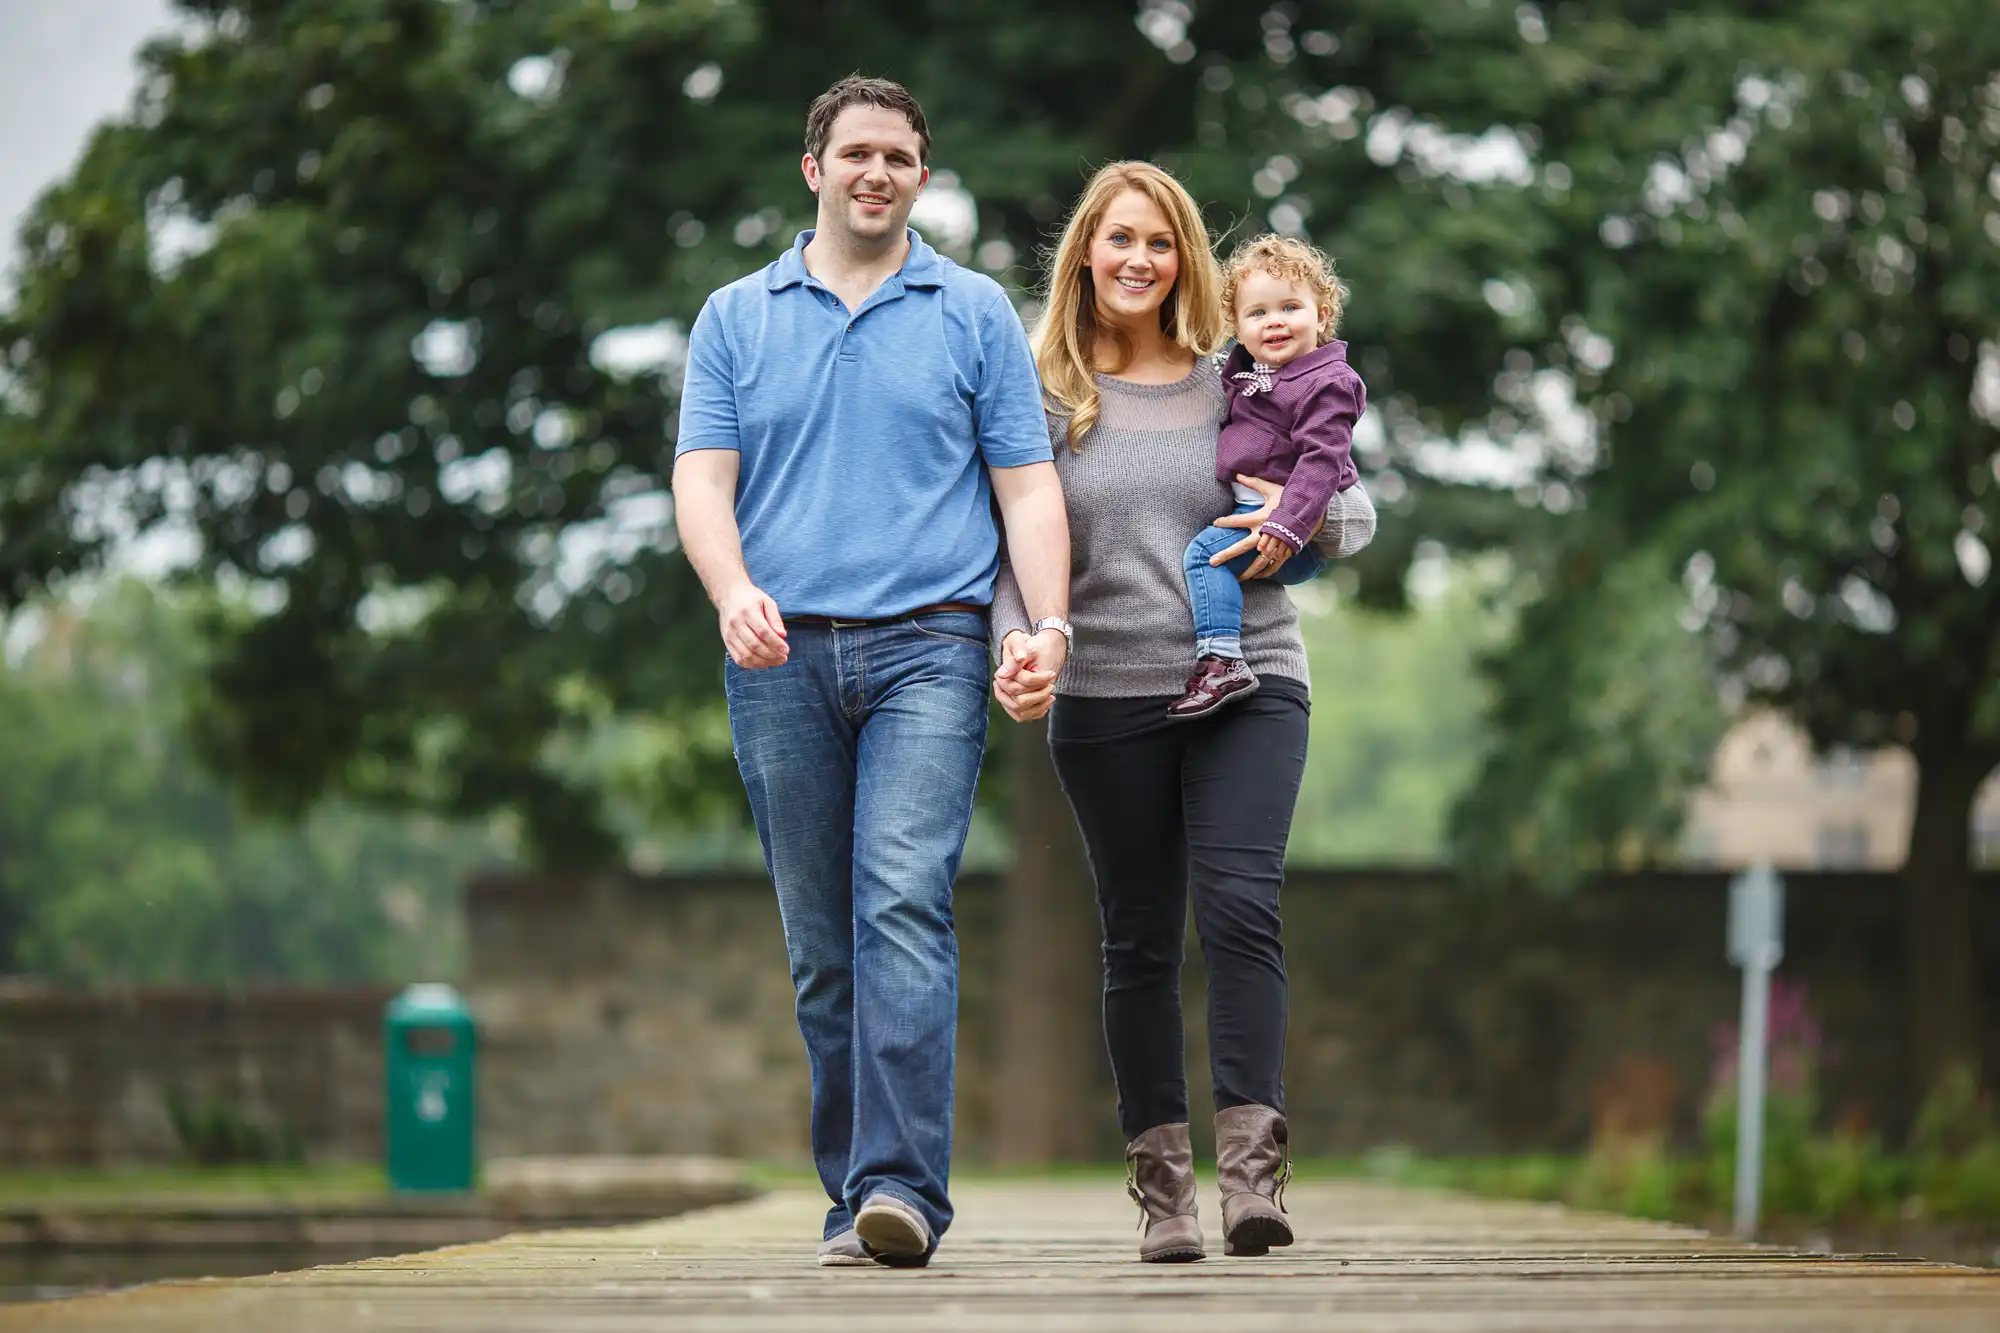 A couple walks on a bridge holding hands and carrying a toddler, surrounded by lush greenery.